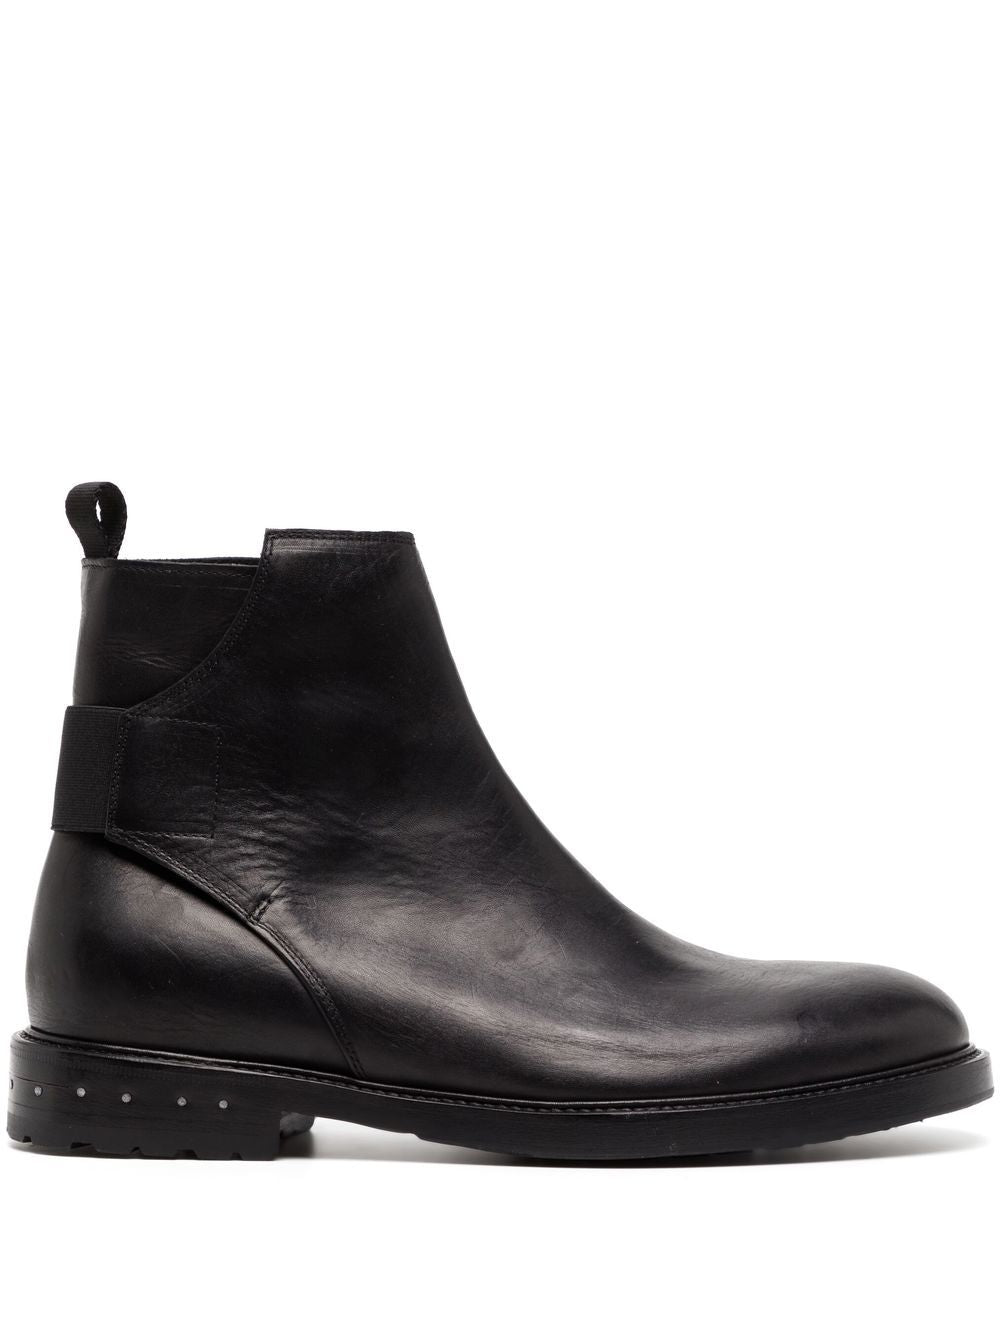 Shop Nicolas Andreas Taralis 30mm Leather Boots